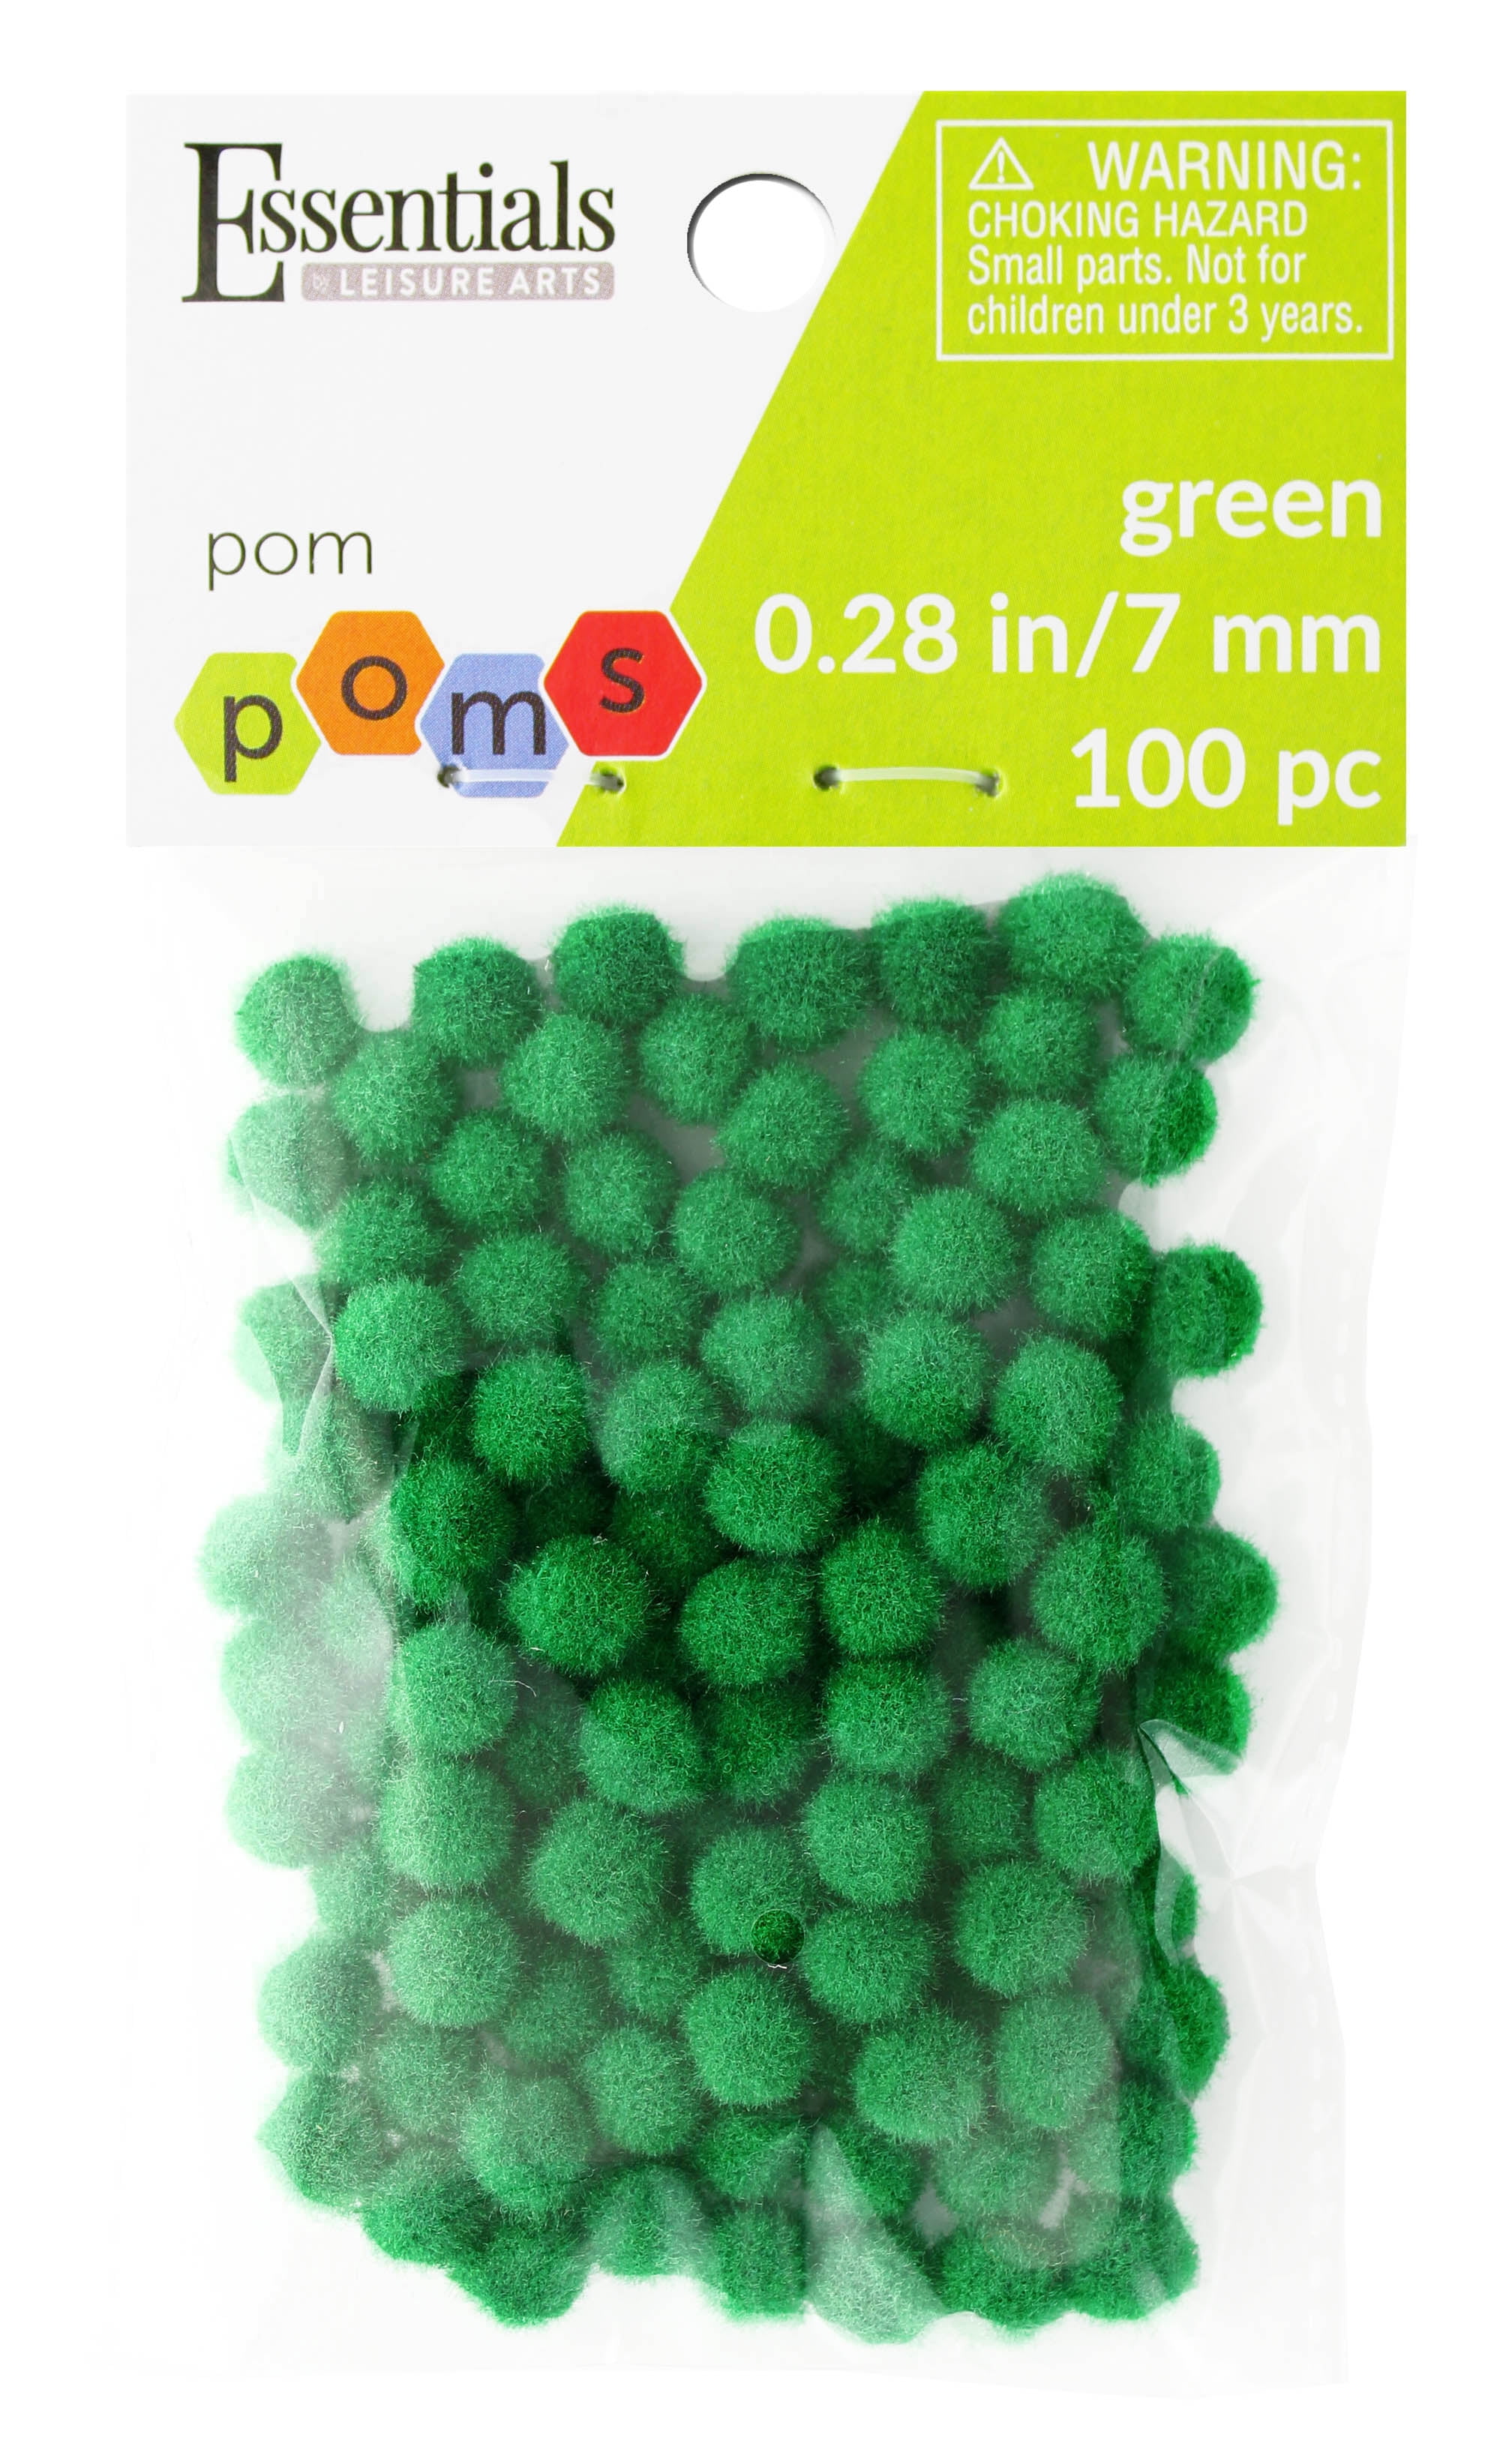 Essentials by Leisure Arts Pom Poms - Green - 7mm - 100 piece pom poms arts  and crafts - green pompoms for crafts - craft pom poms - puff balls for  crafts 